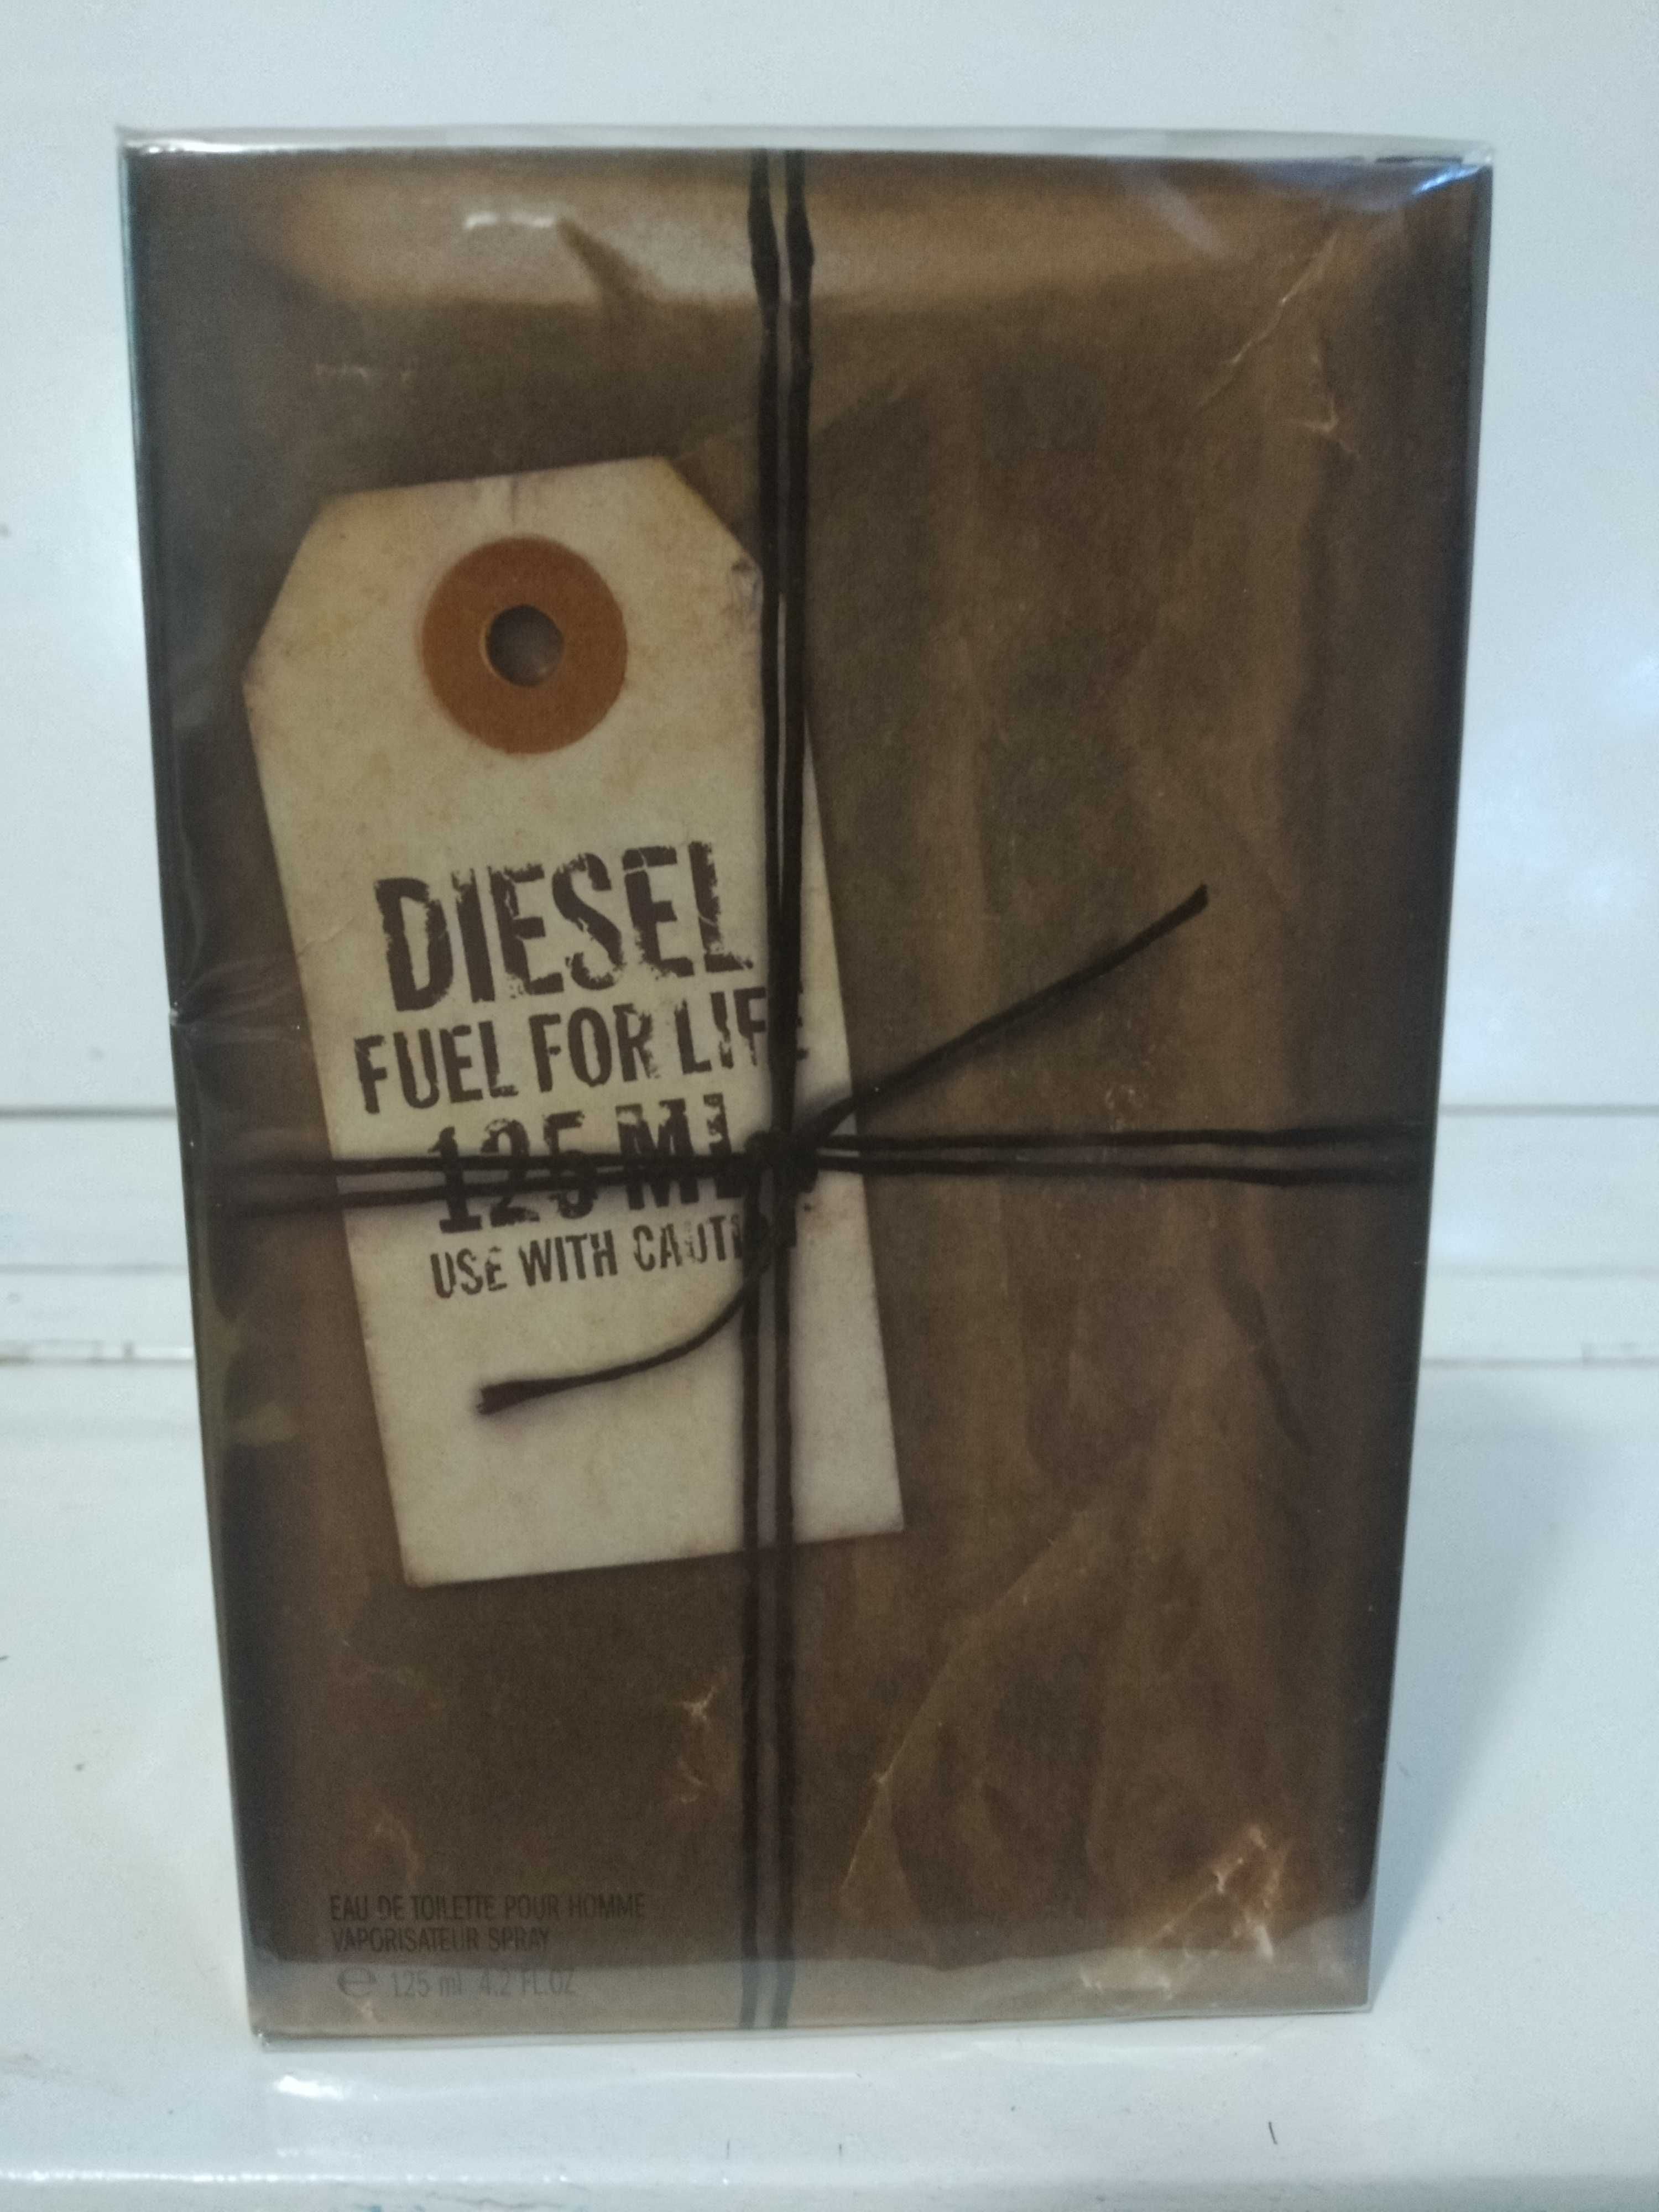 Diesel Fuel for Life Homme, 125 ml